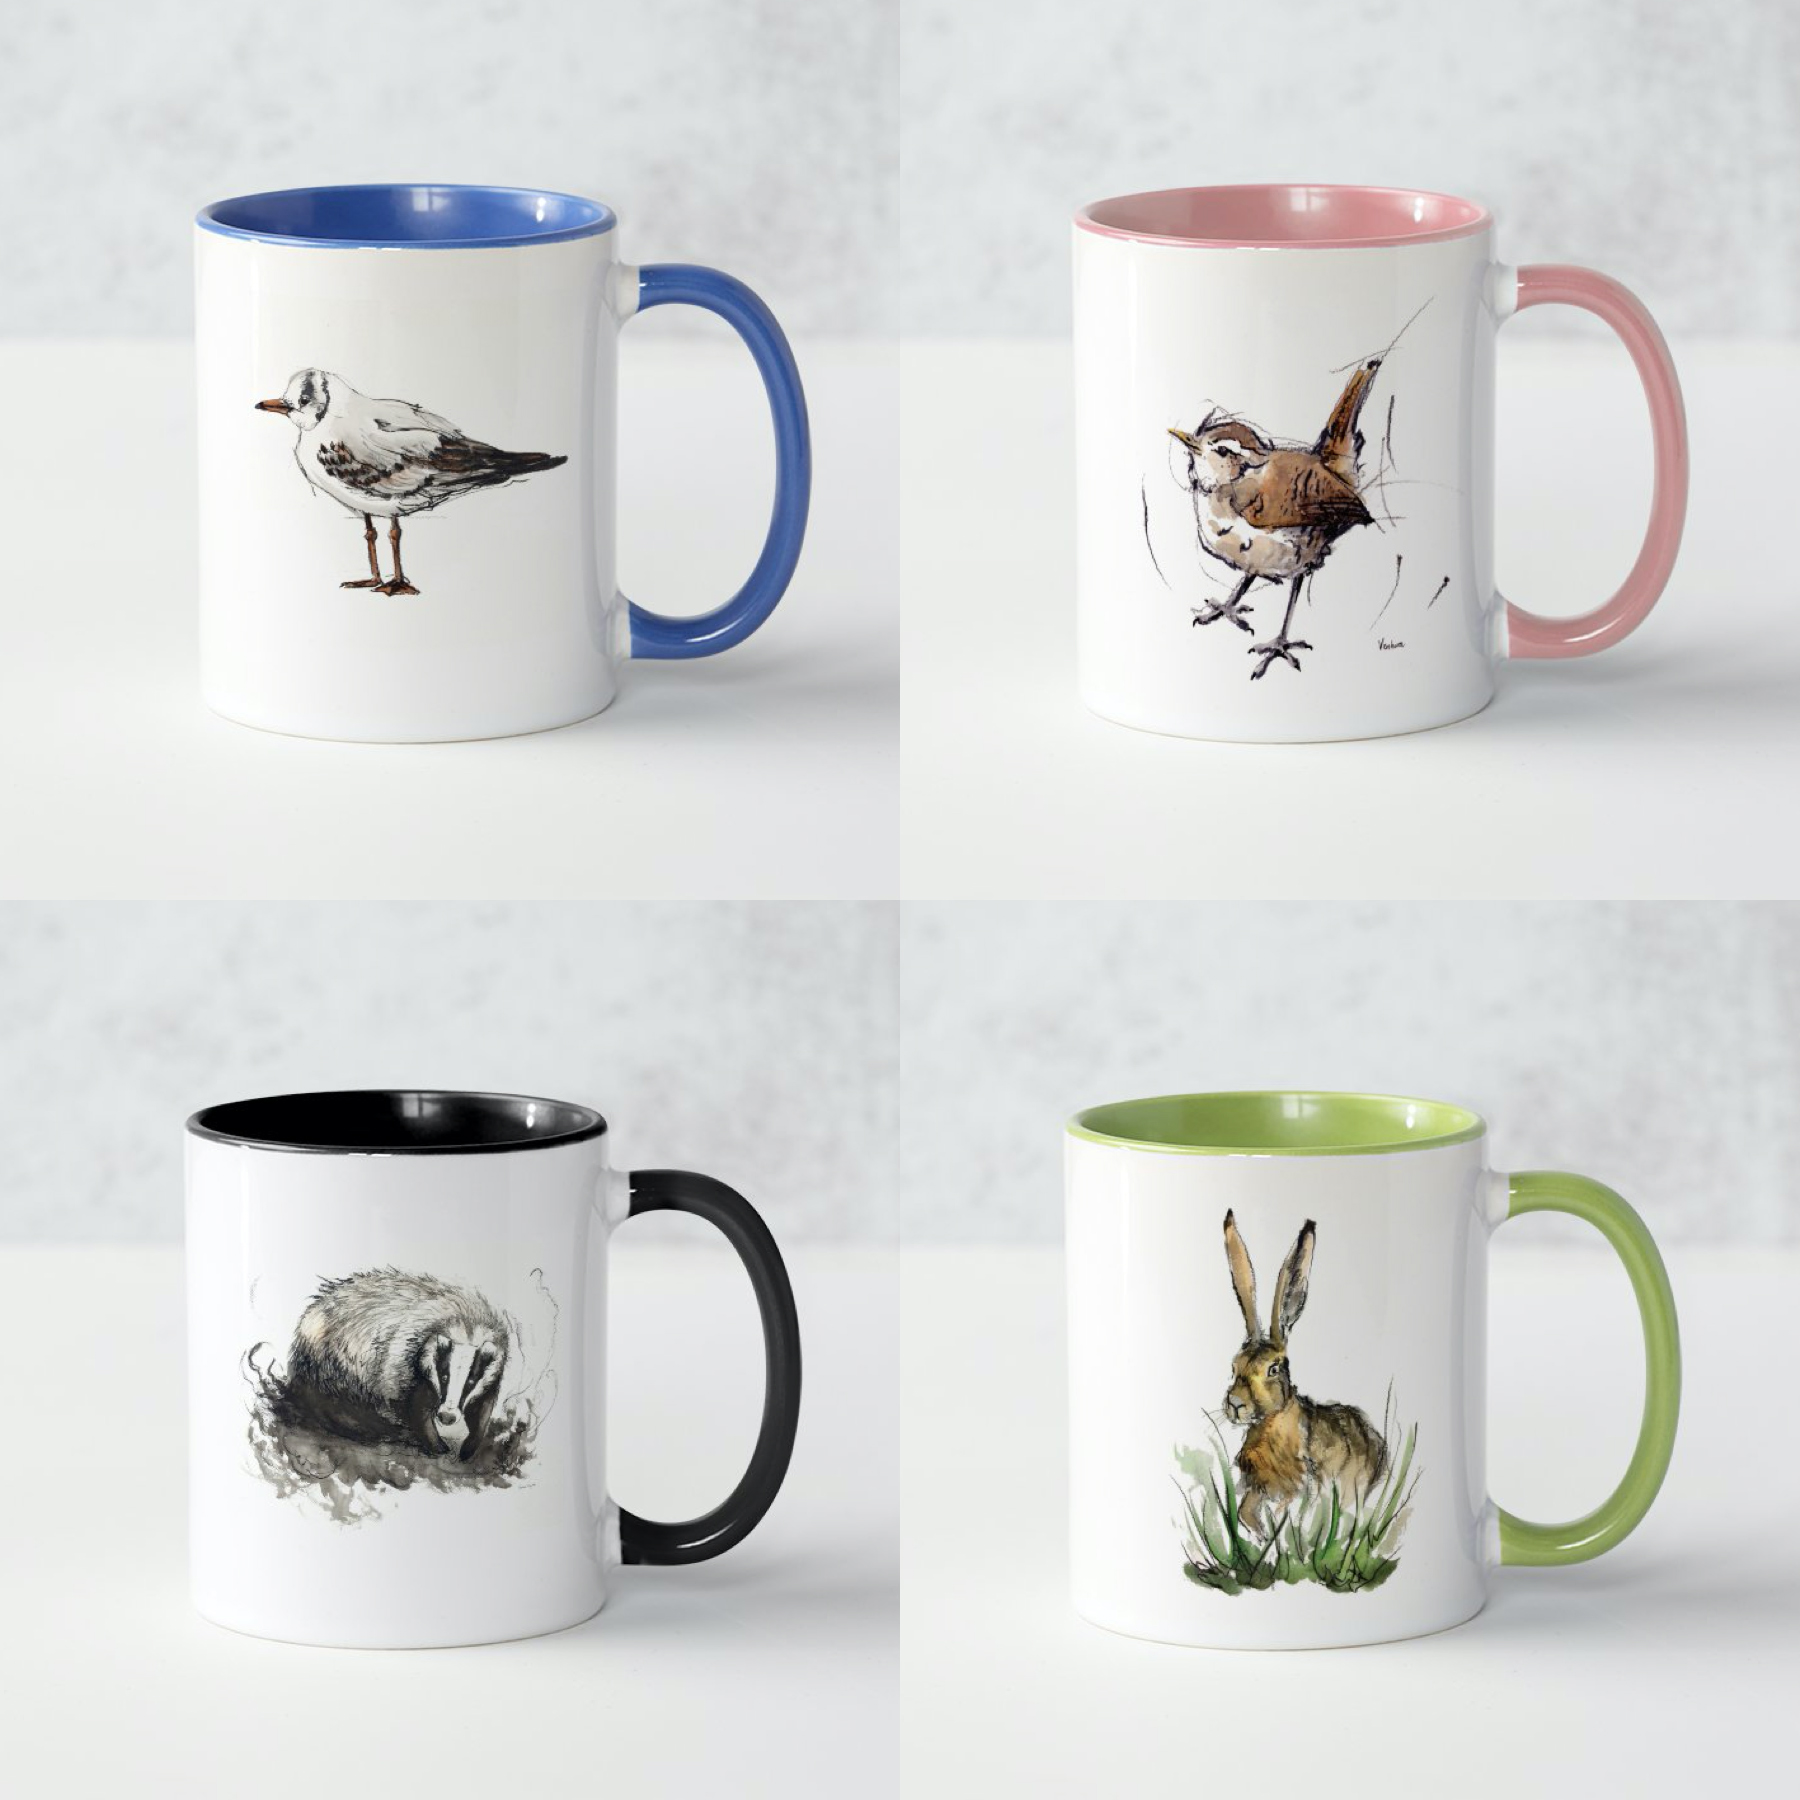 Featured image for “Sketch mugs”